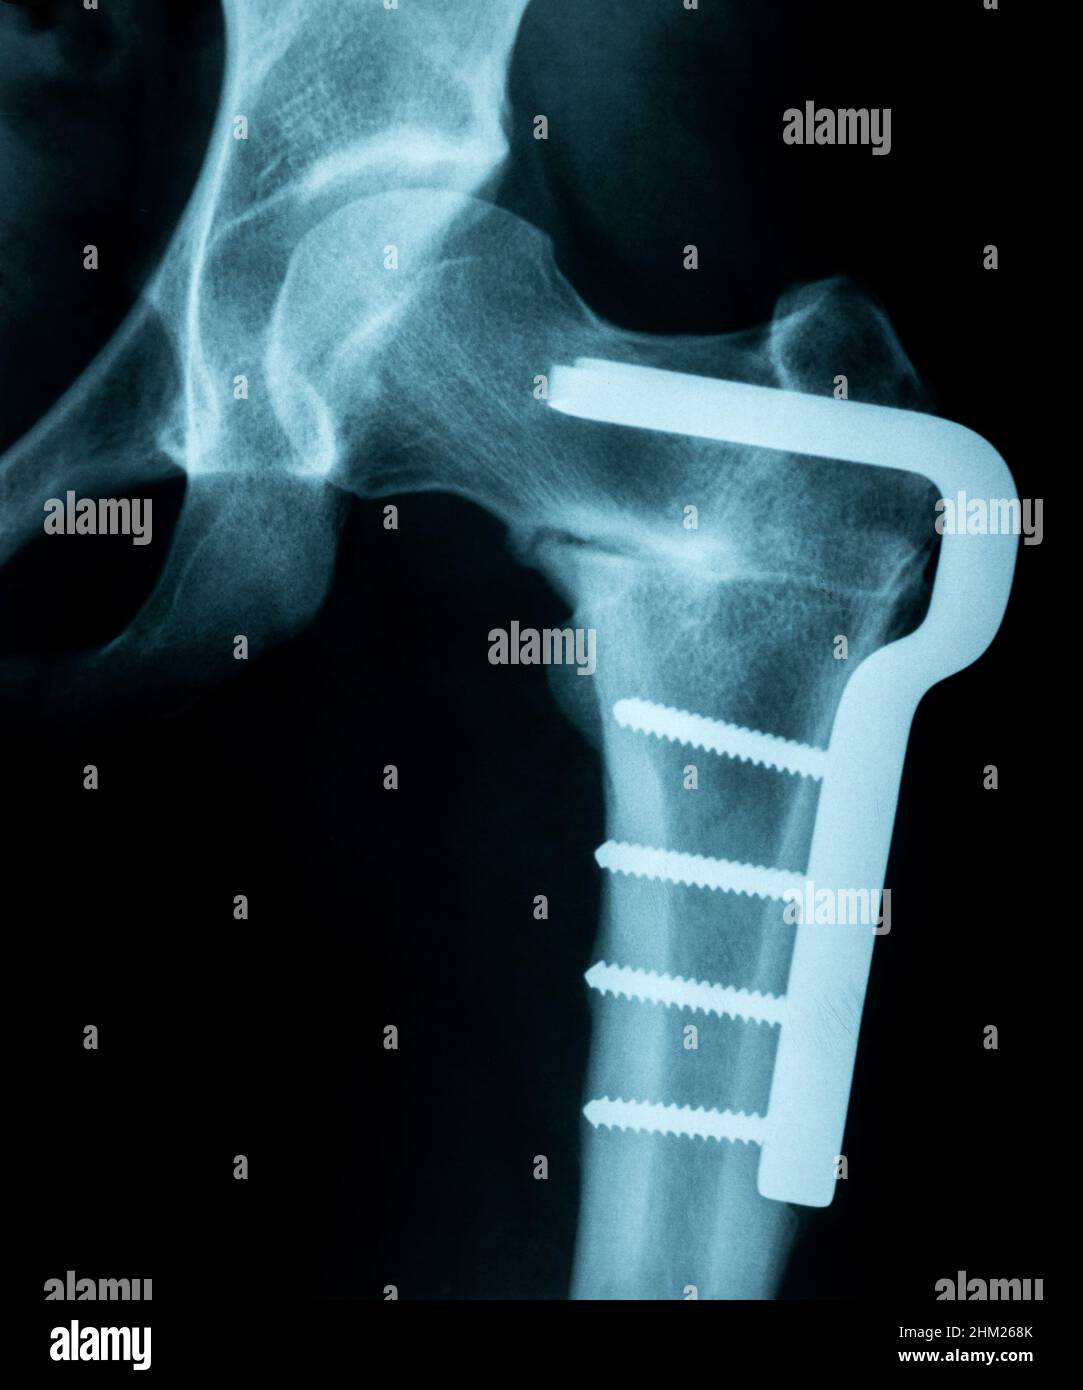 X-Ray Image of a broken pelvis/hip with metal pins holding it together Stock Photo